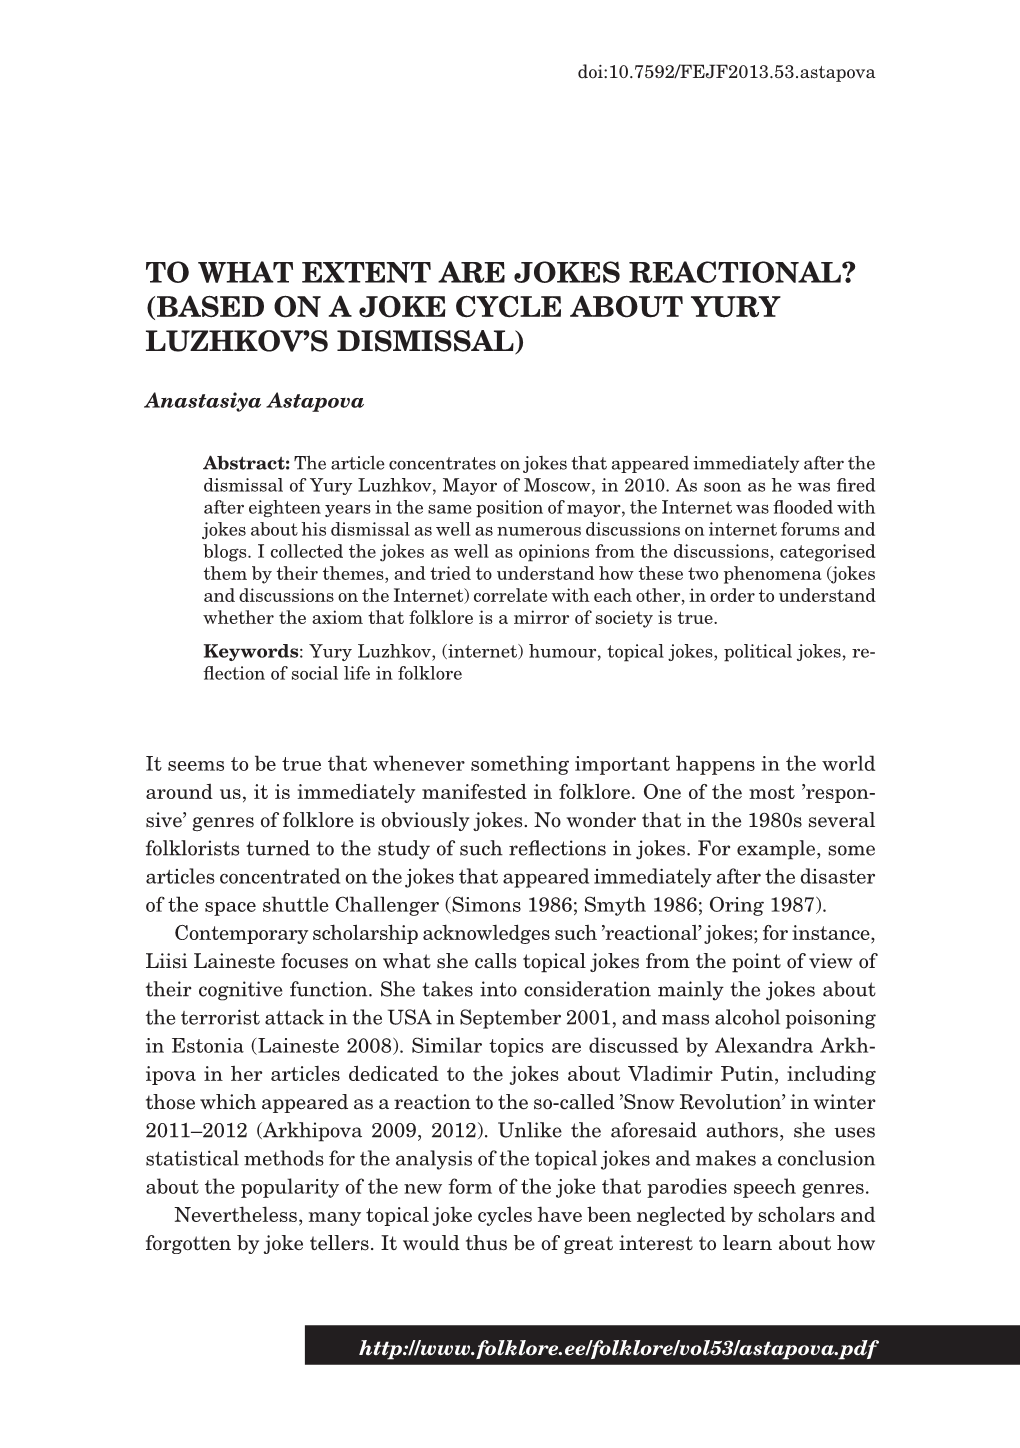 To What Extent Are Jokes Reactional? (Based on a Joke Cycle About Yury Luzhkov’S Dismissal)